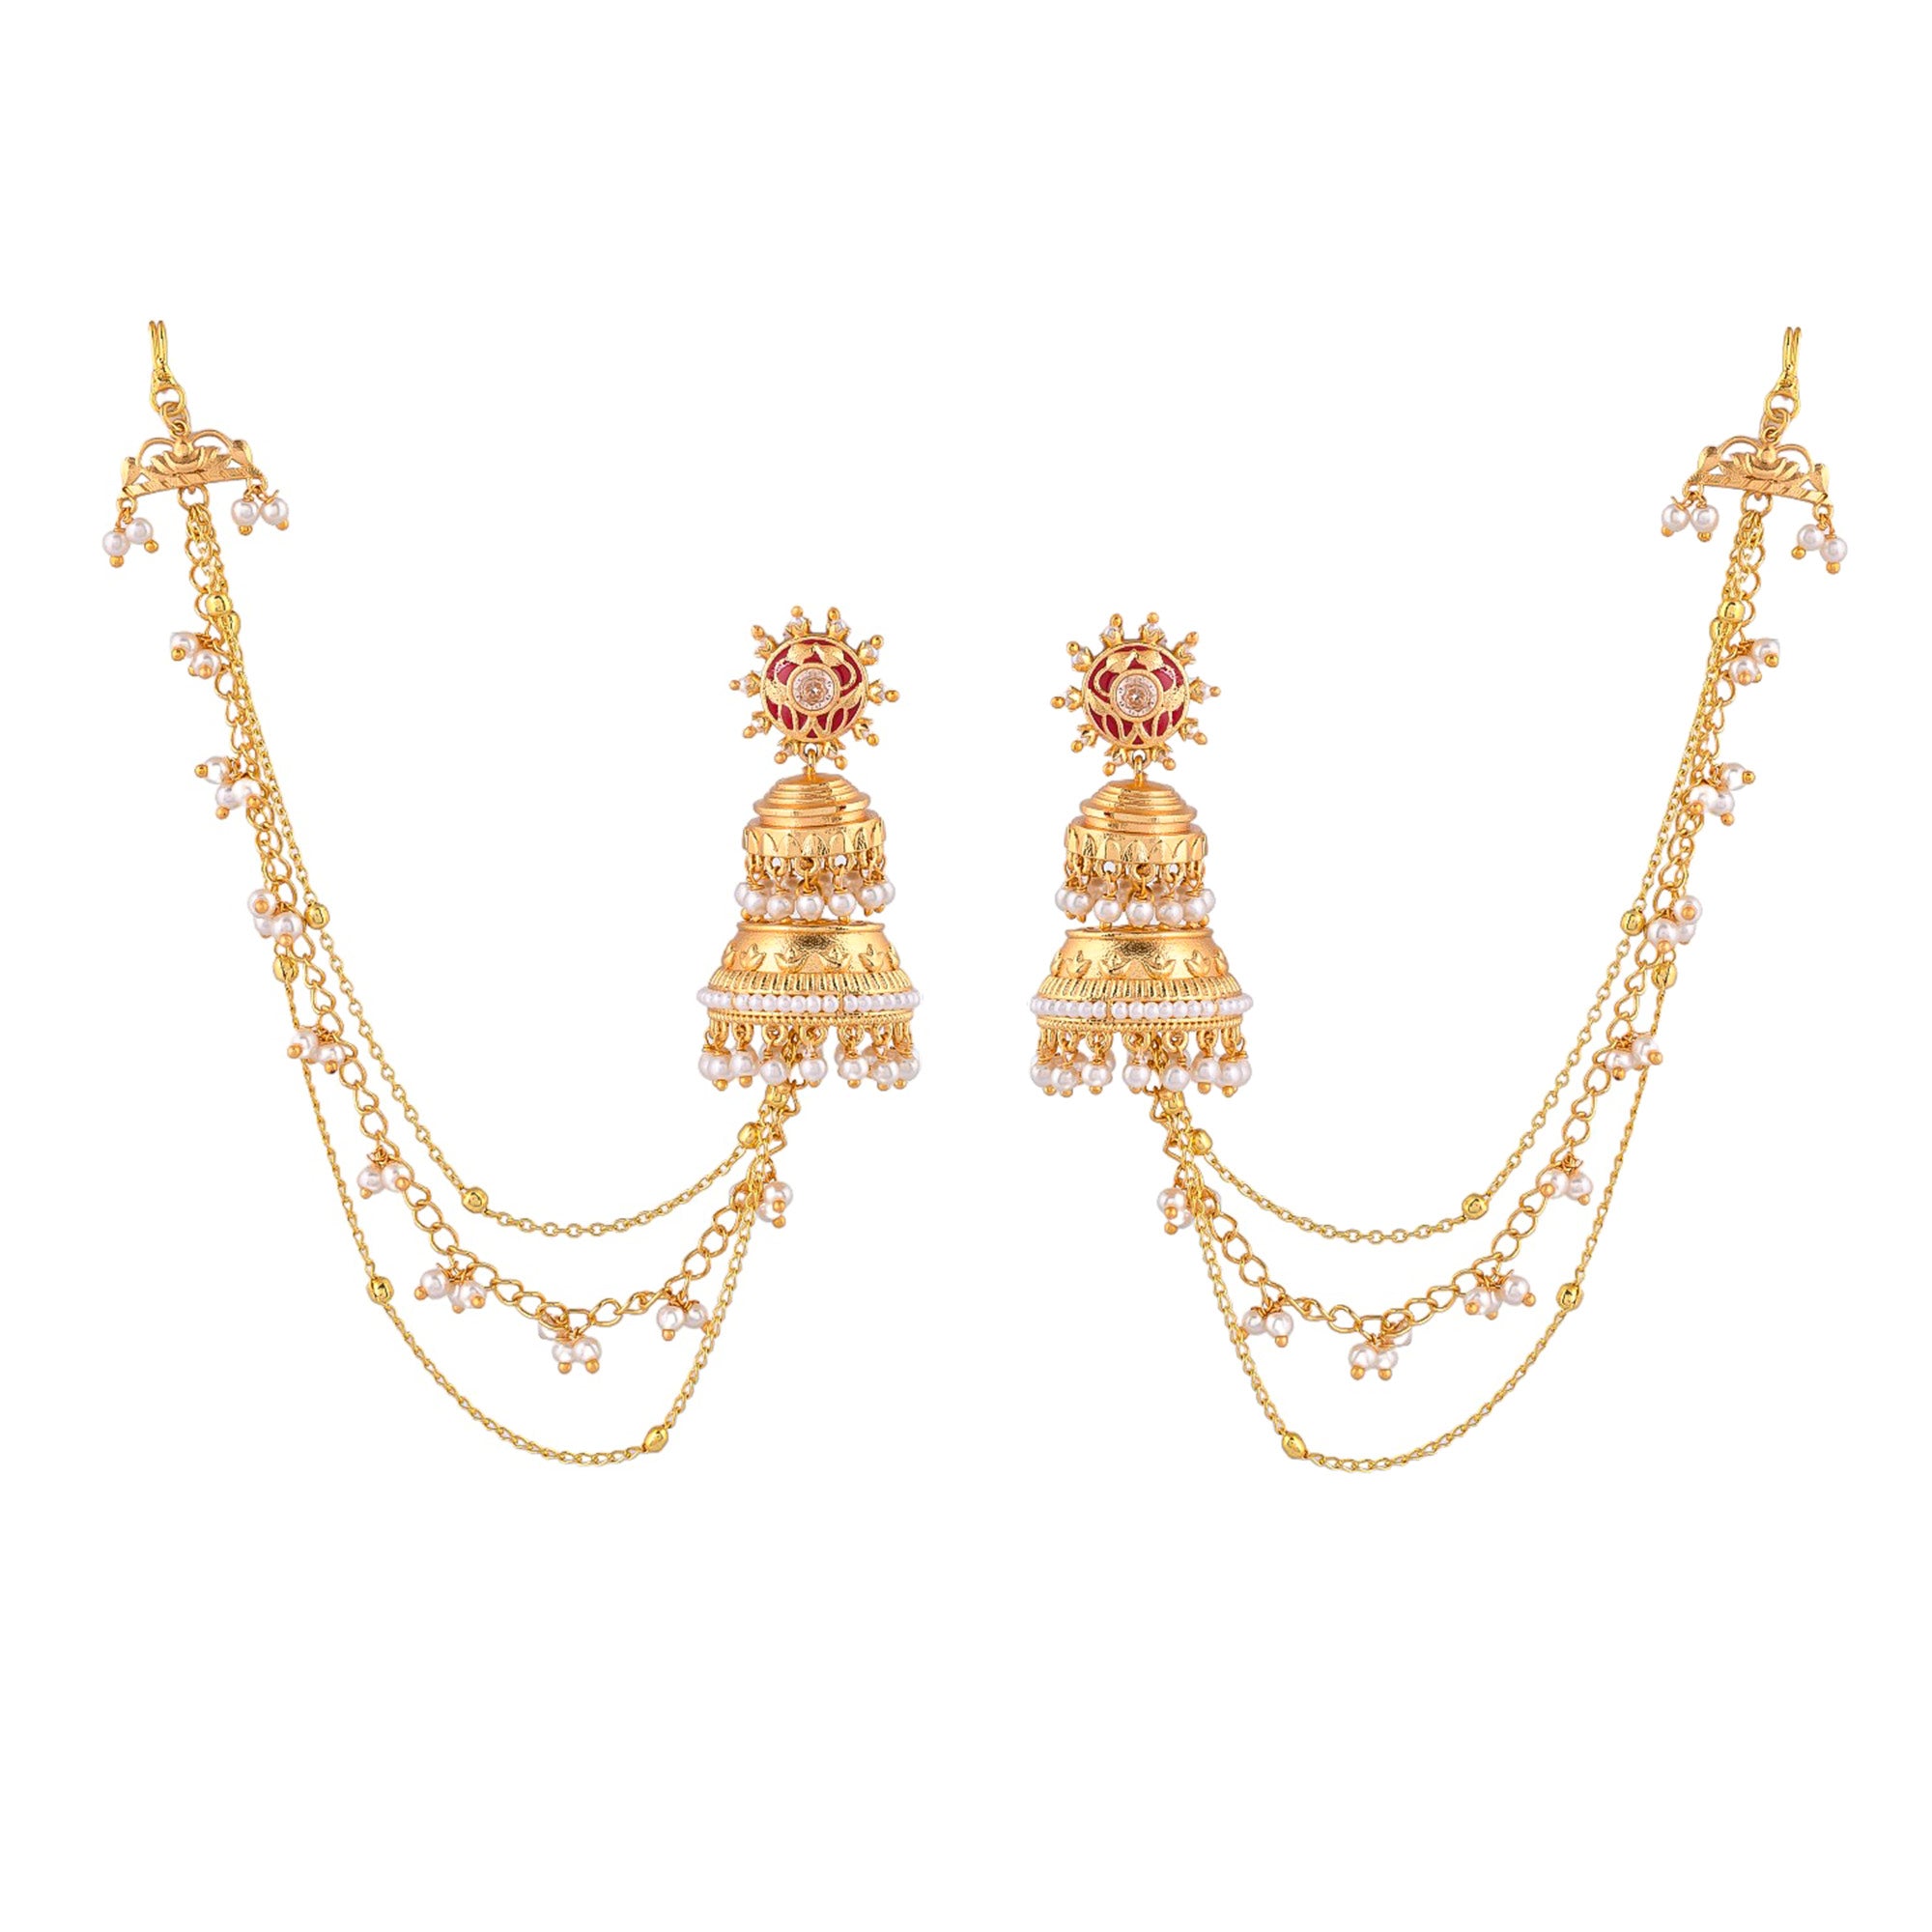 Apsara Vintage Inspired Brass Faux Pearls Adorned Yellow Gold Plated Jhumka Earrings